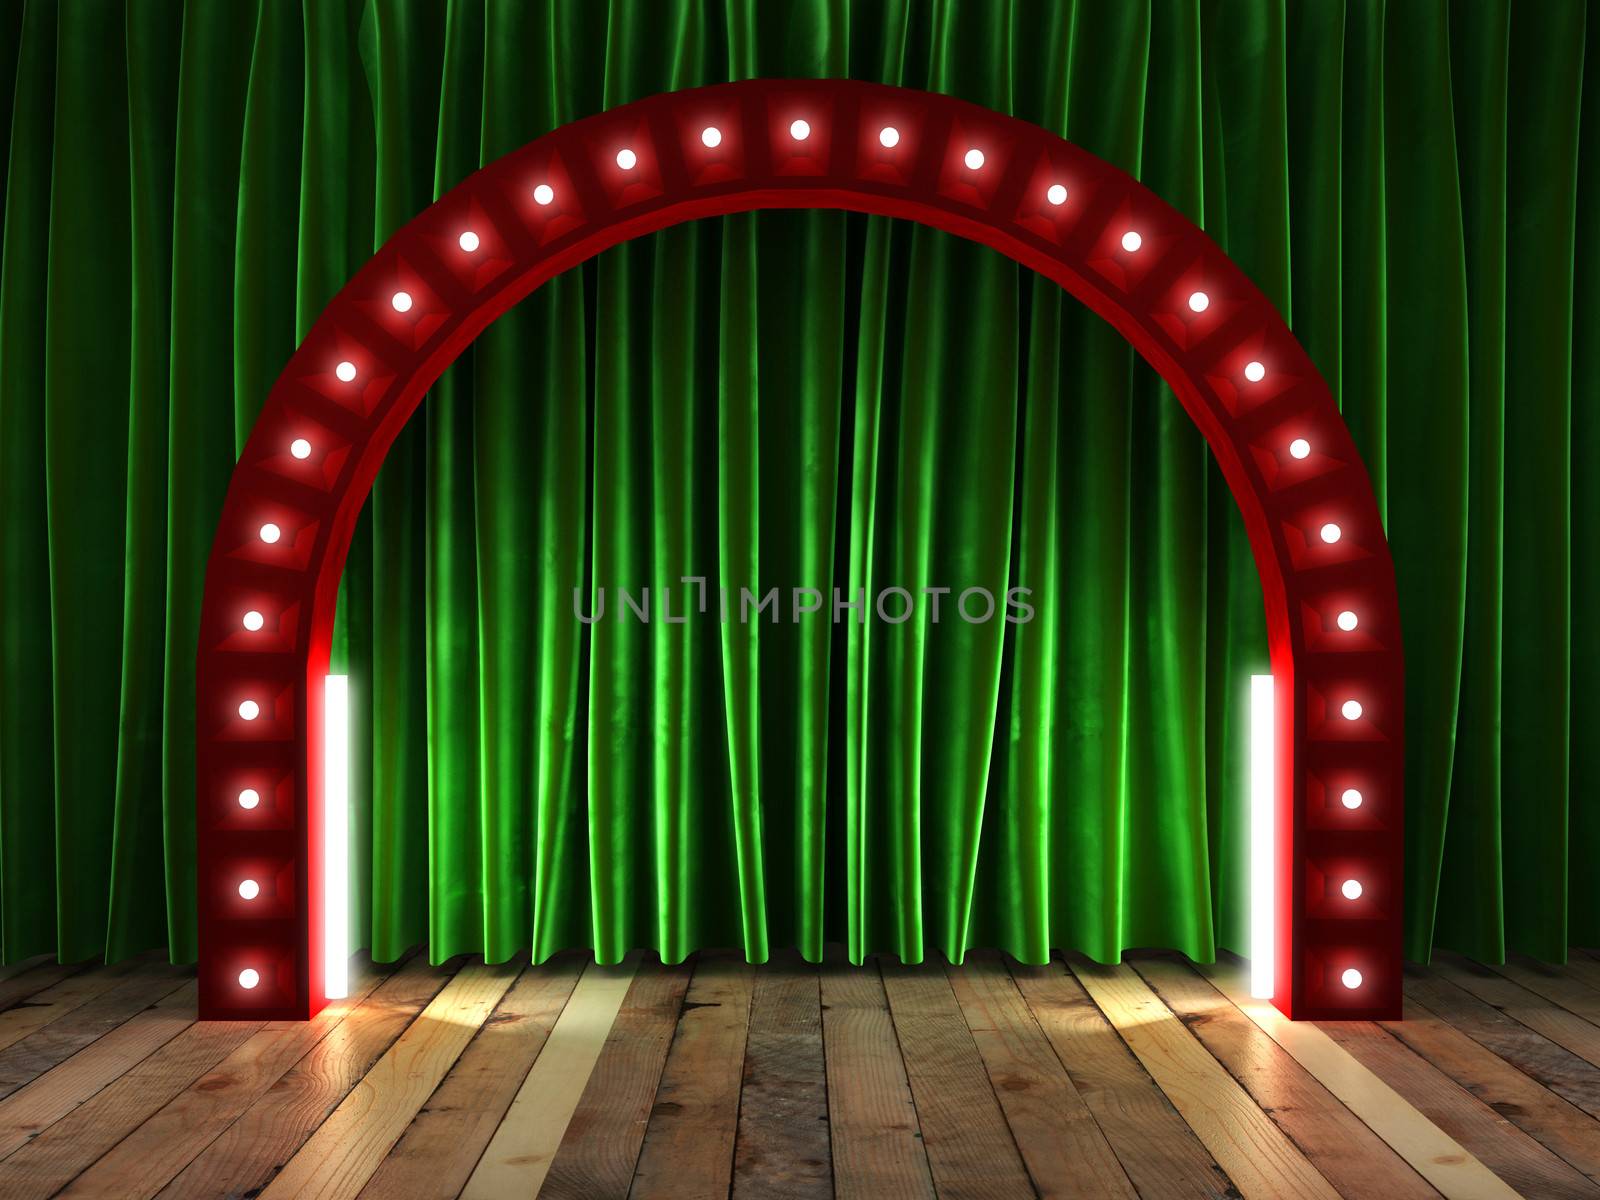 green fabrick curtain on stage